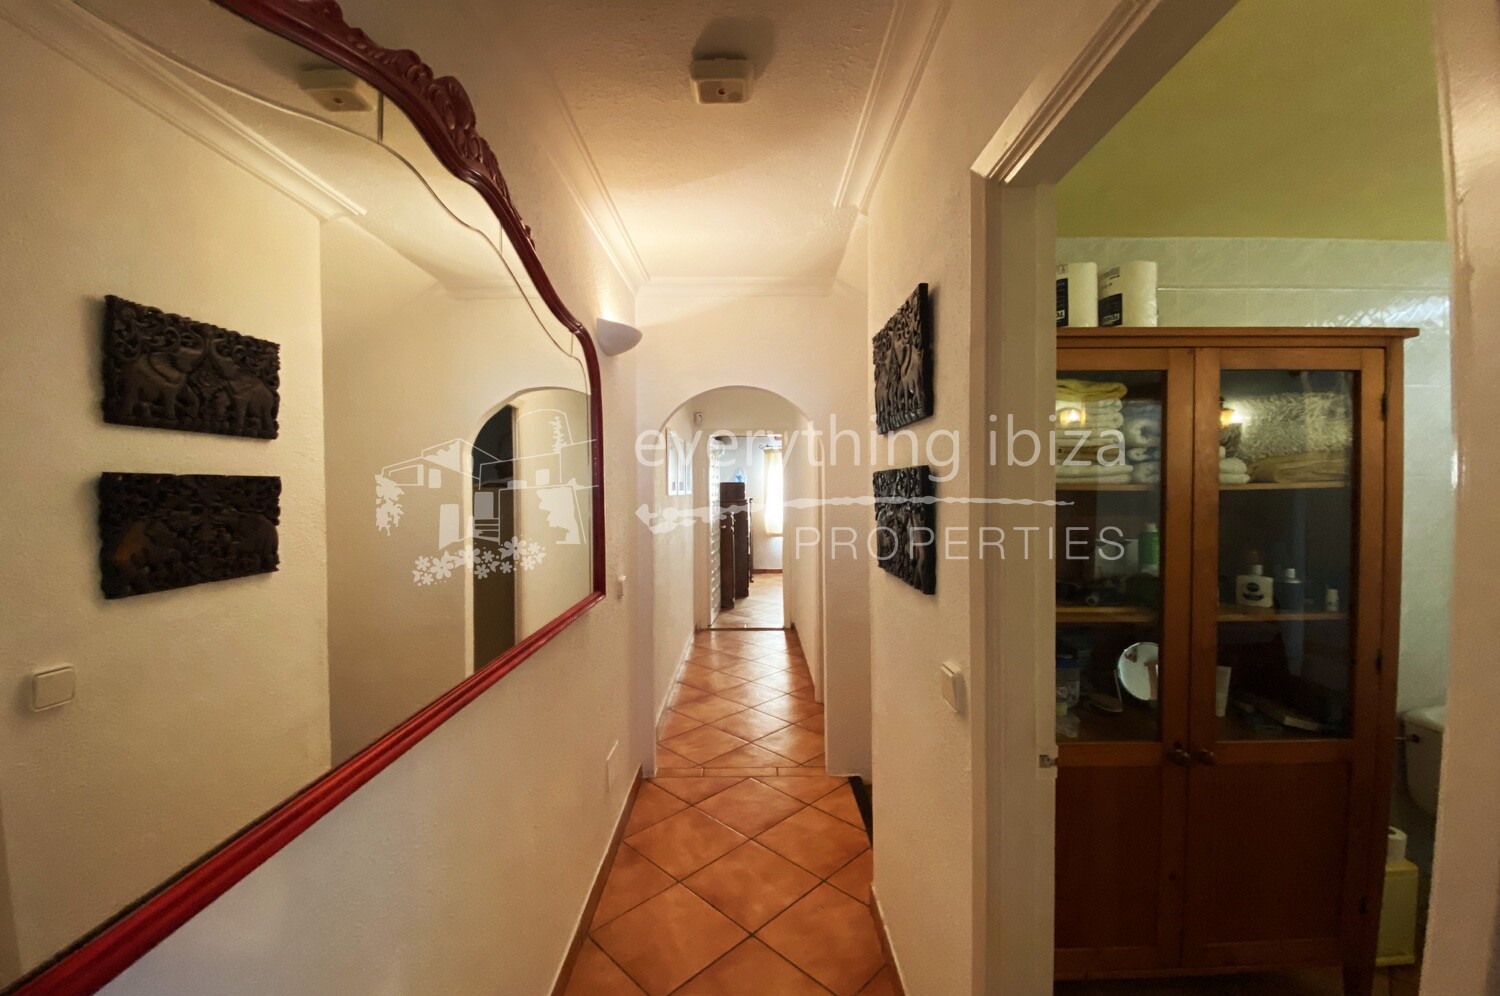 Charming Traditionally Styled Townhouse Close to the Beach, ref. 1507, for sale in Ibiza by everything ibiza Properties